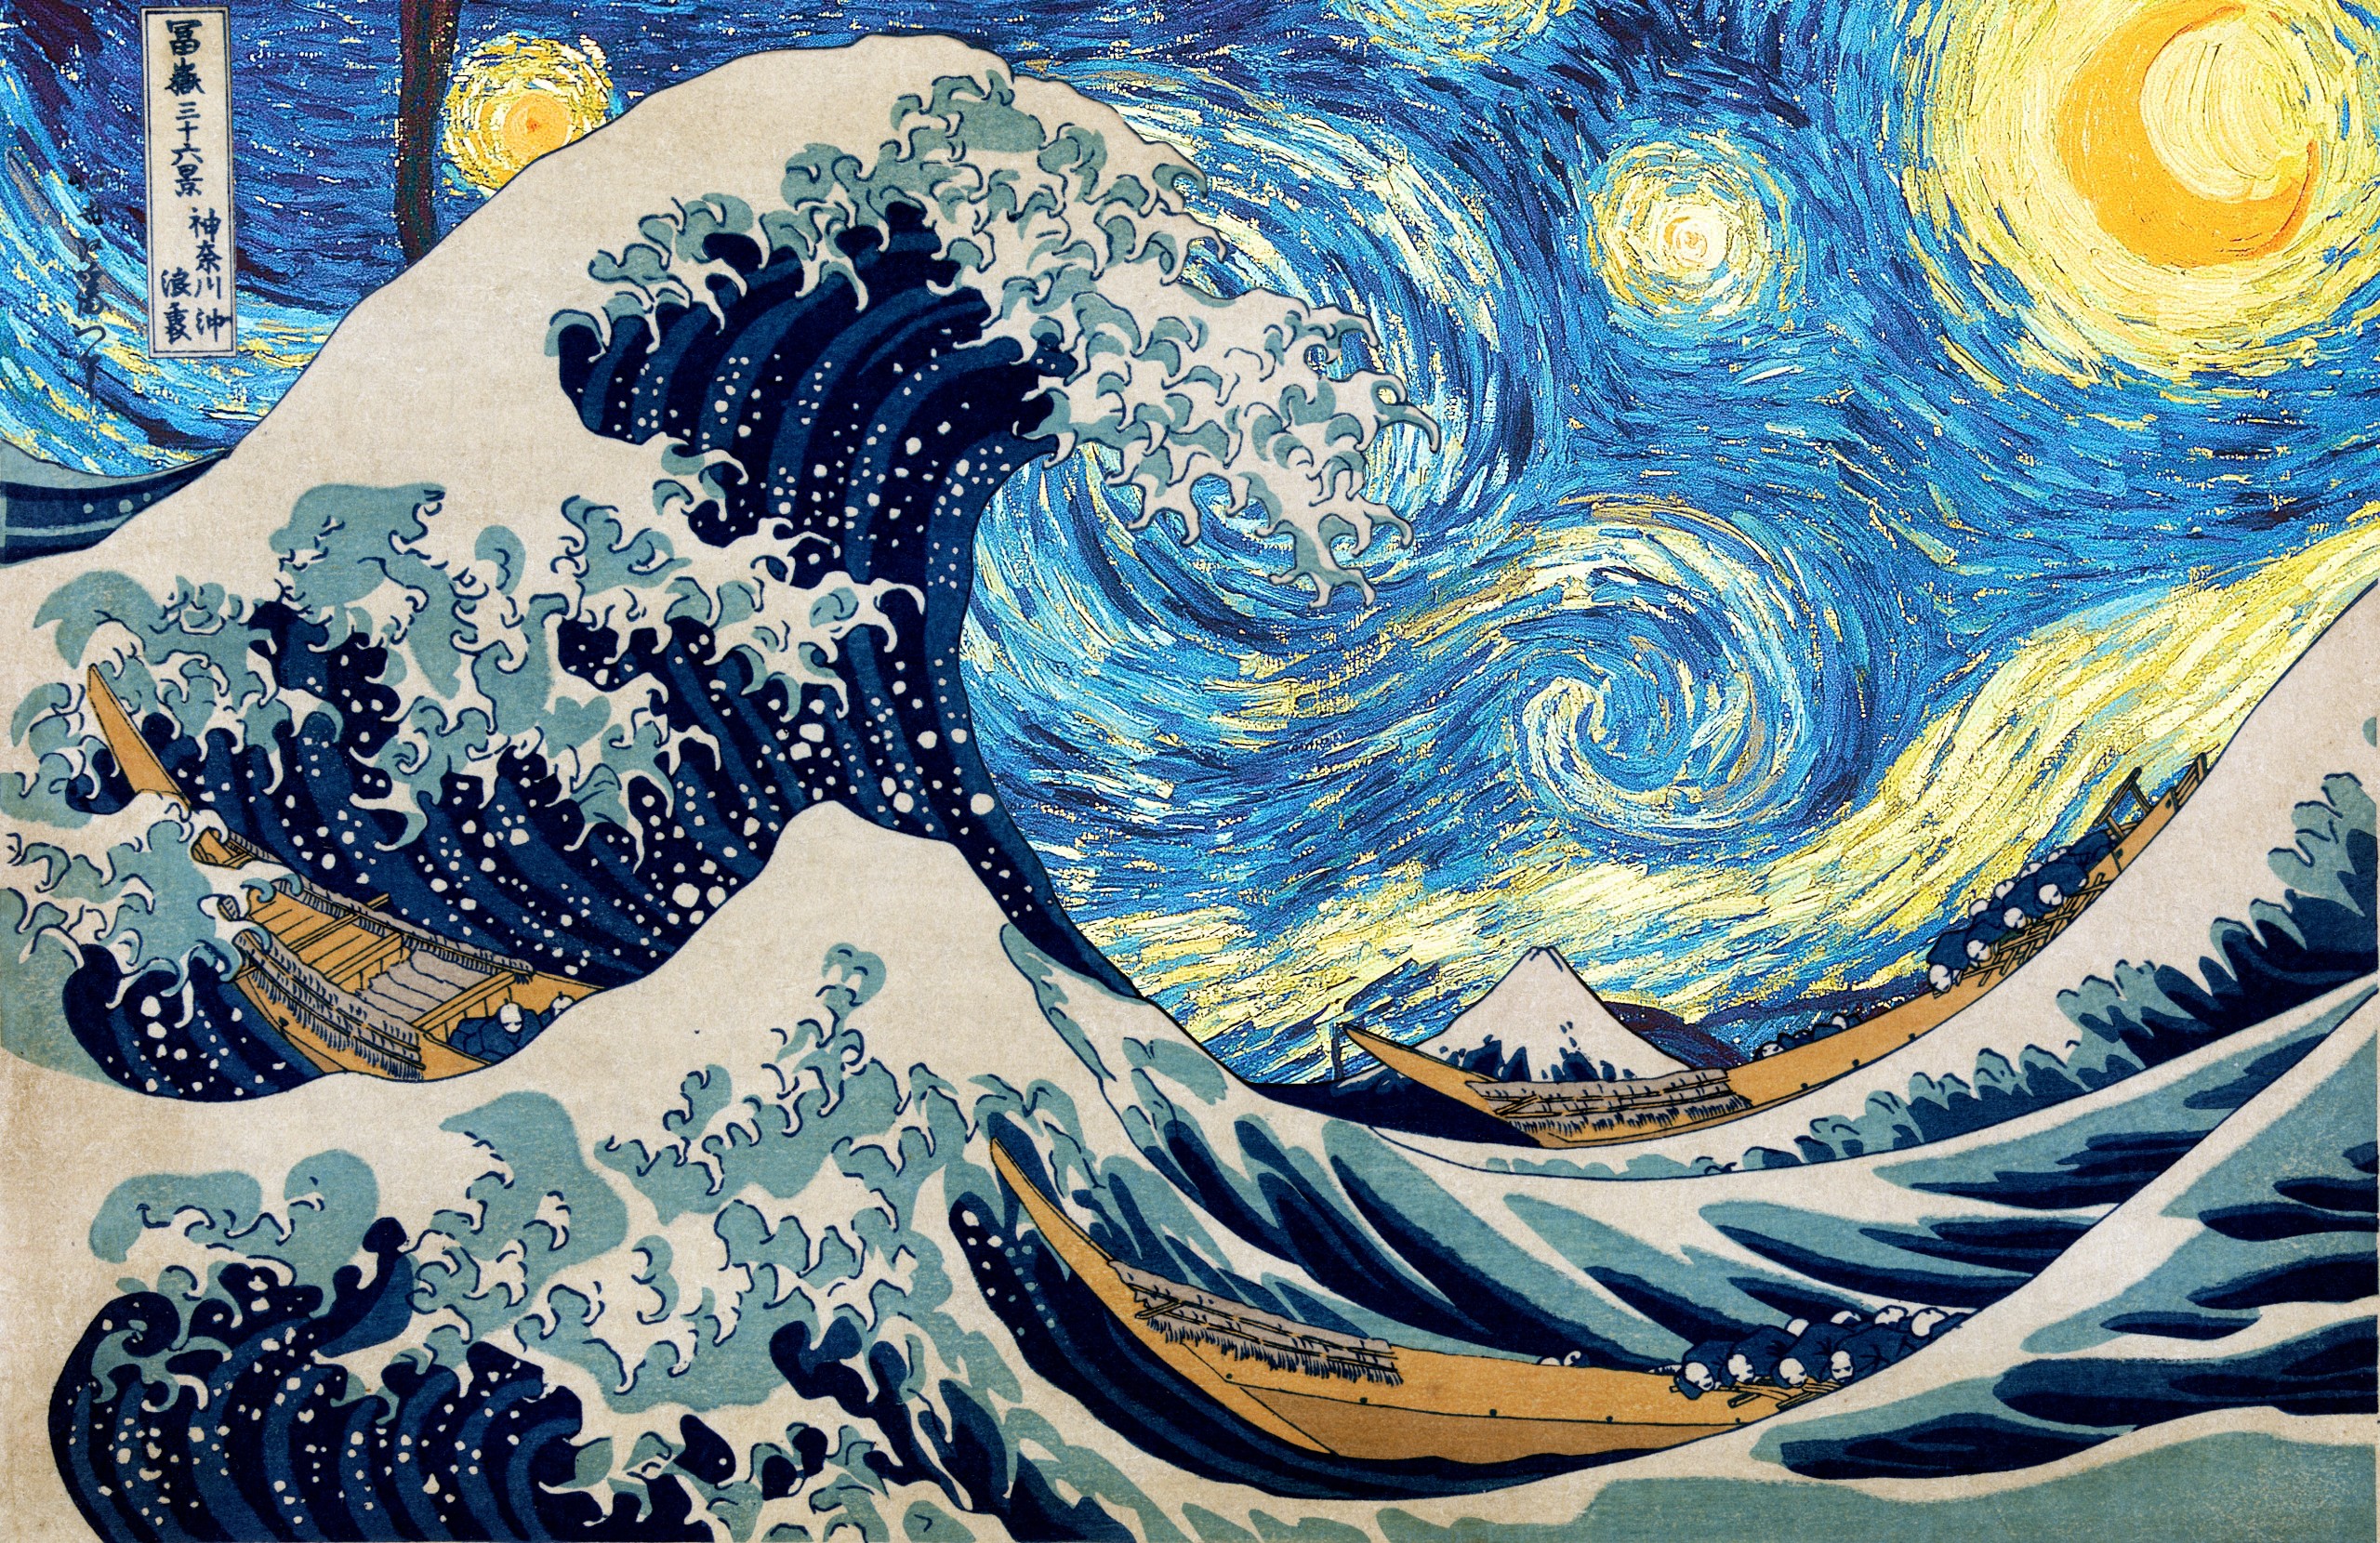 General 2560x1660 Hokusai starry night Vincent van Gogh The Great Wave of Kanagawa artwork photo manipulation blue sea waves water sky crossover